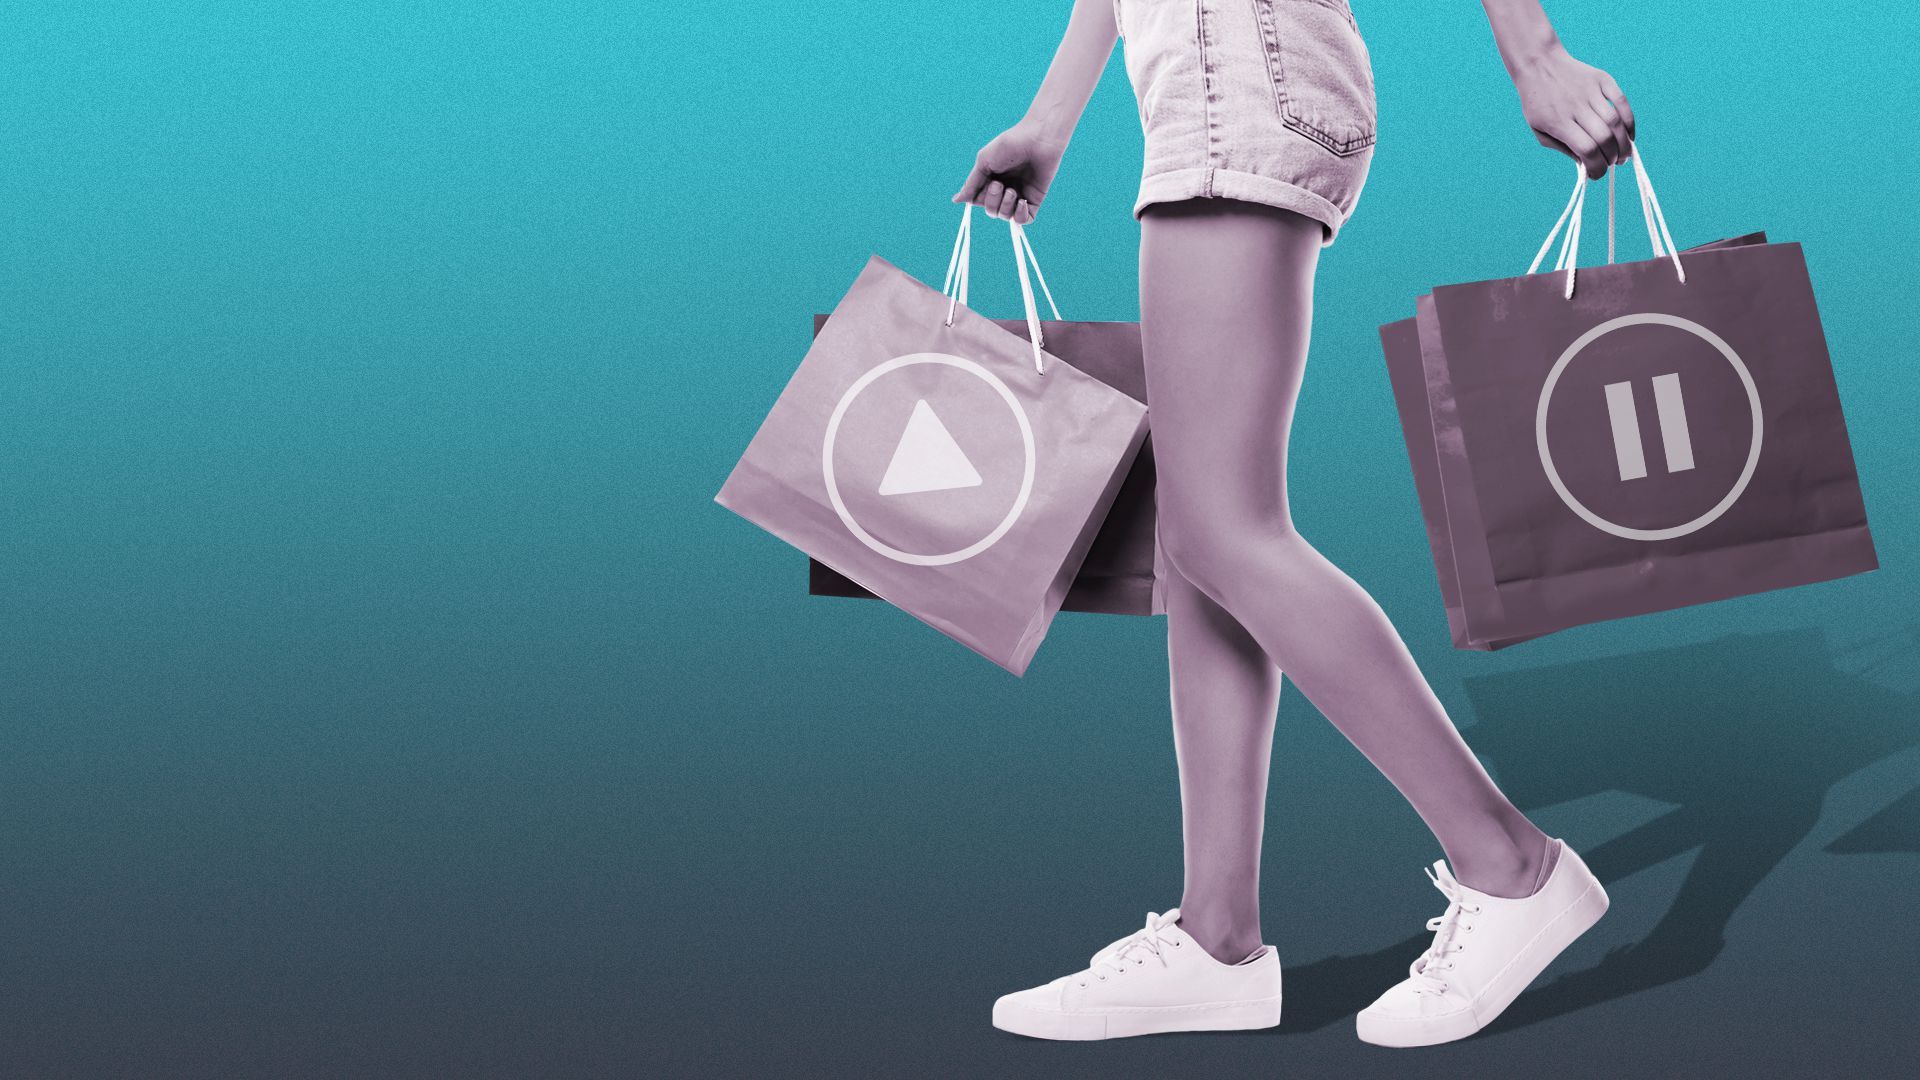 Illustration of a person carrying shopping bags printed with play and pause buttons.